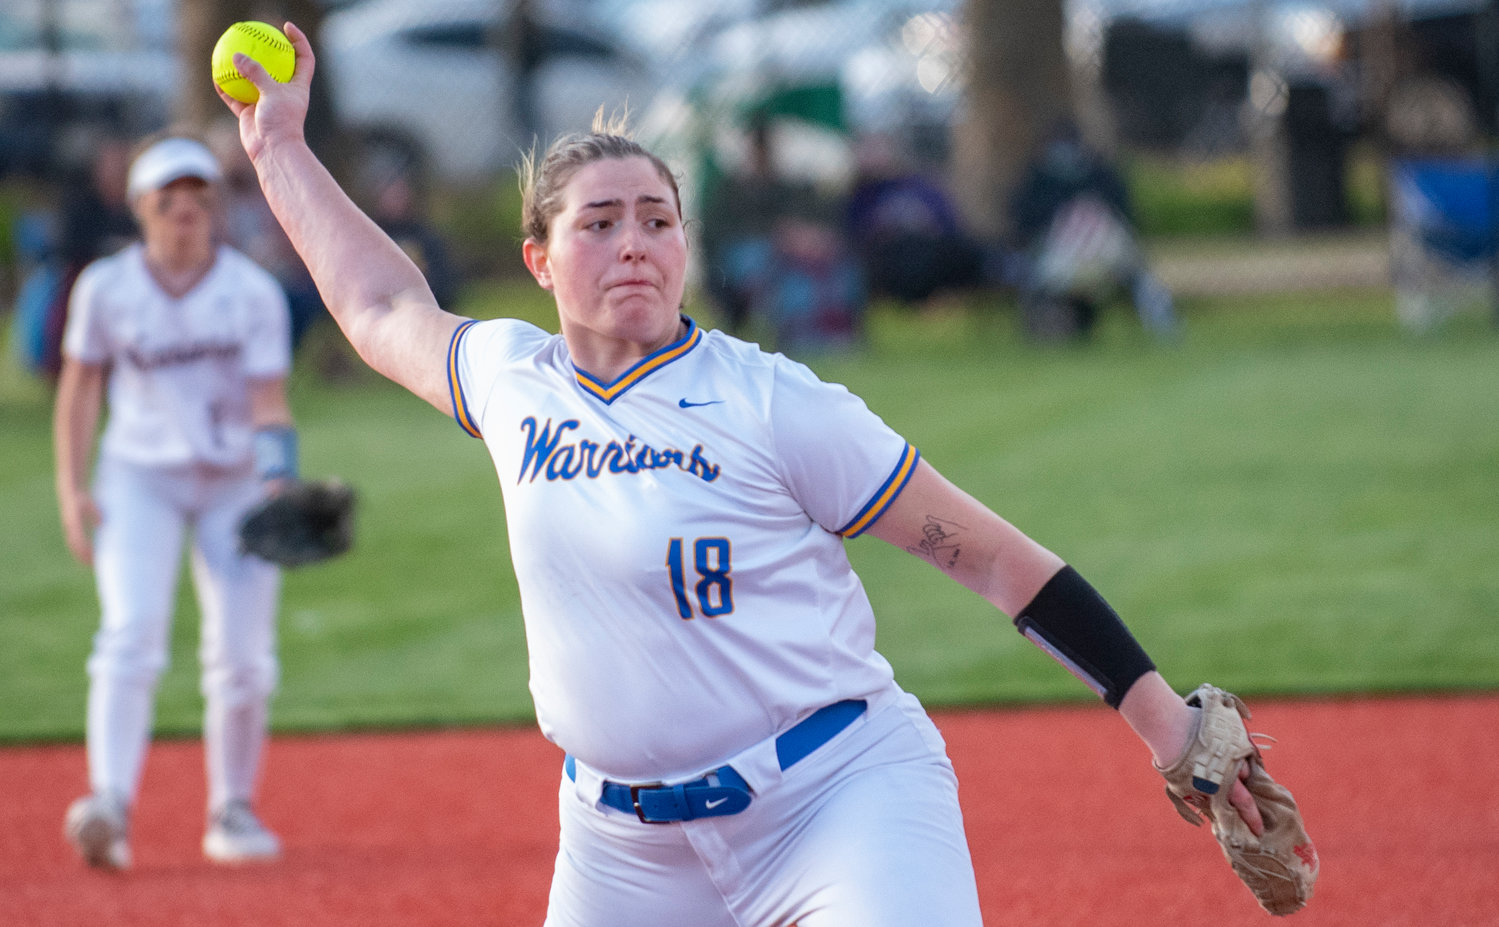 Rochester's Liz Phelps delivers a pitch to W.F. West on Thursday.